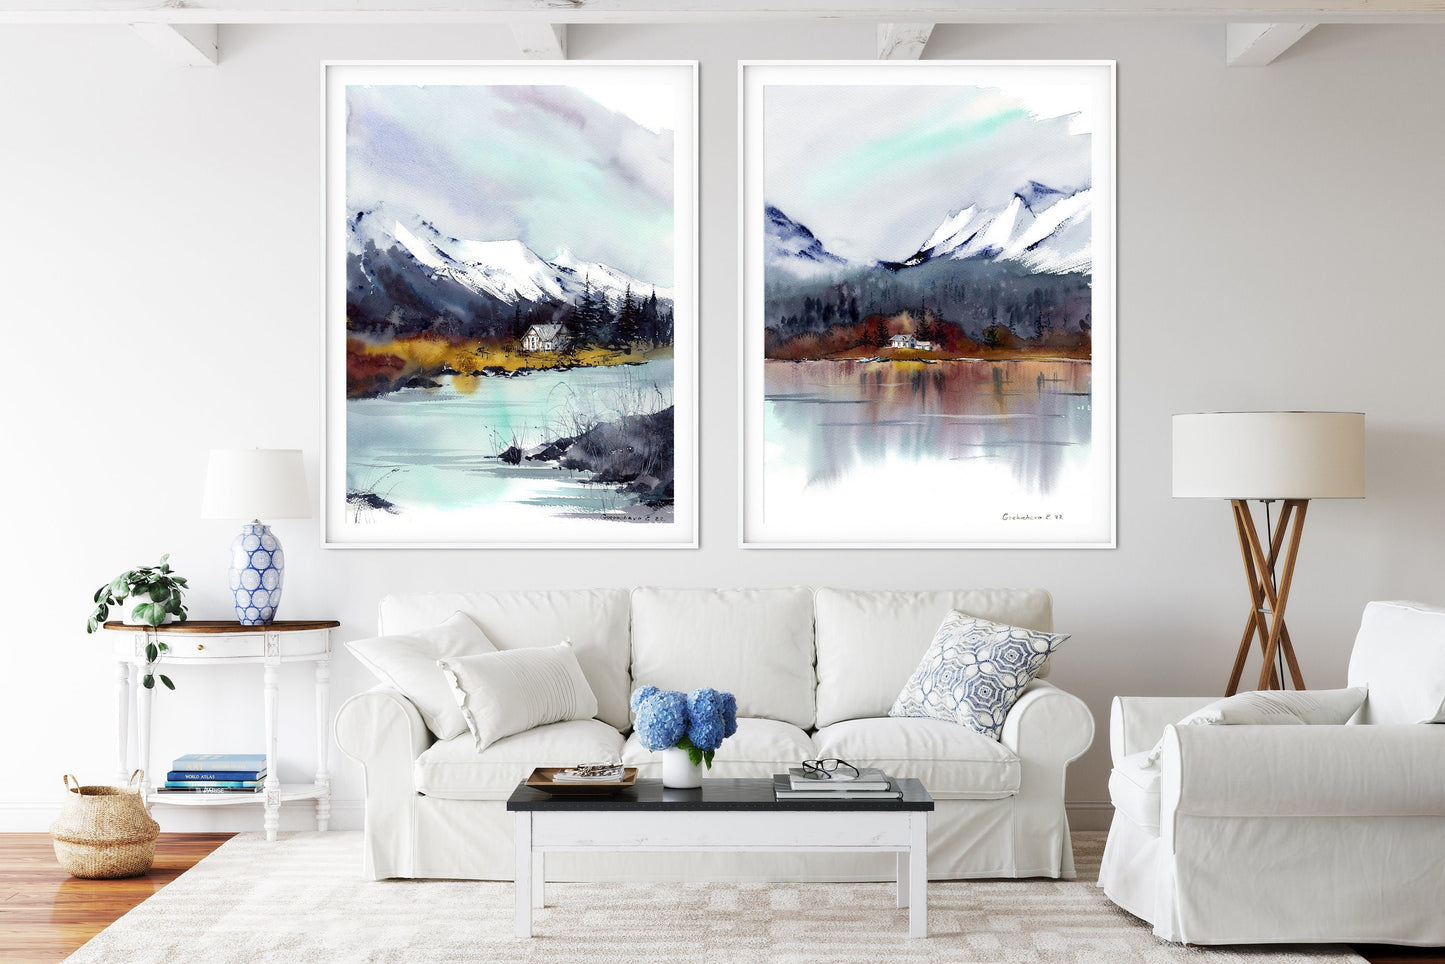 Mountain Lake Set of 2 Piece Fall Nature Wall Decor, Abstract Minimalist Watercolor Painting, Scenery Extra Large Prints